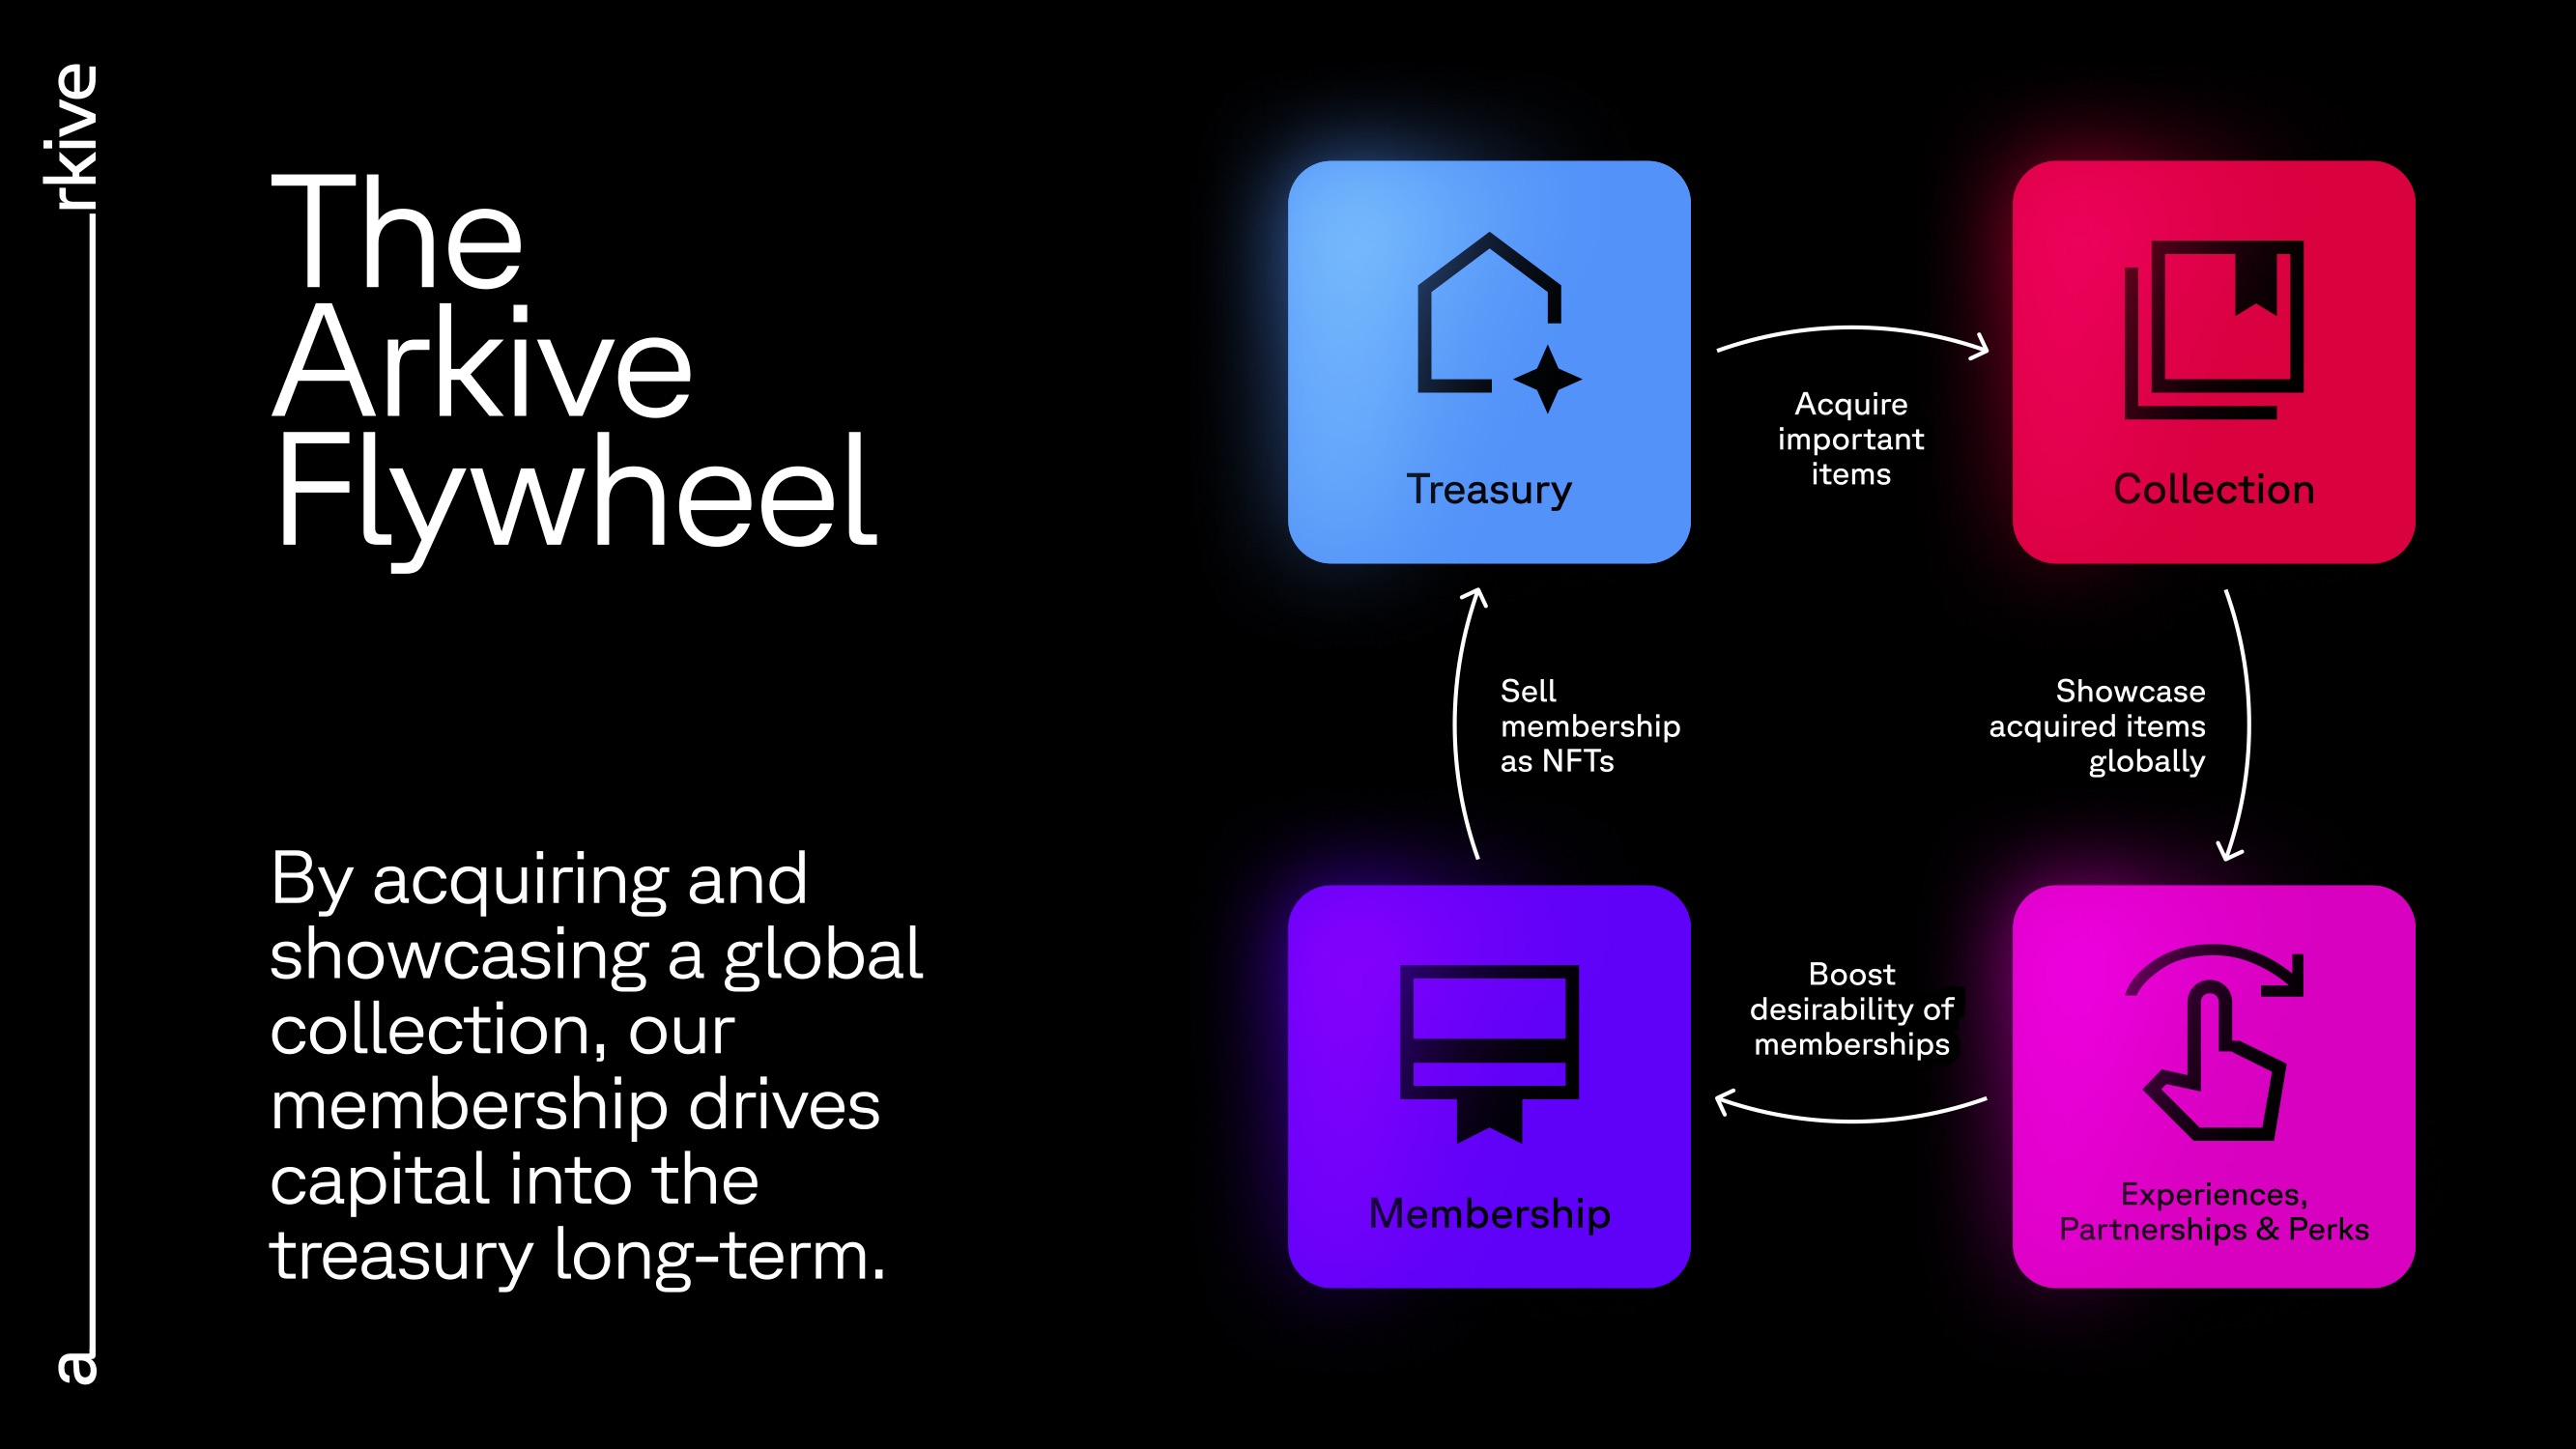 Flywheel: By acquiring and showcasing a global collection, our membership drives capital into the treasury long-term.